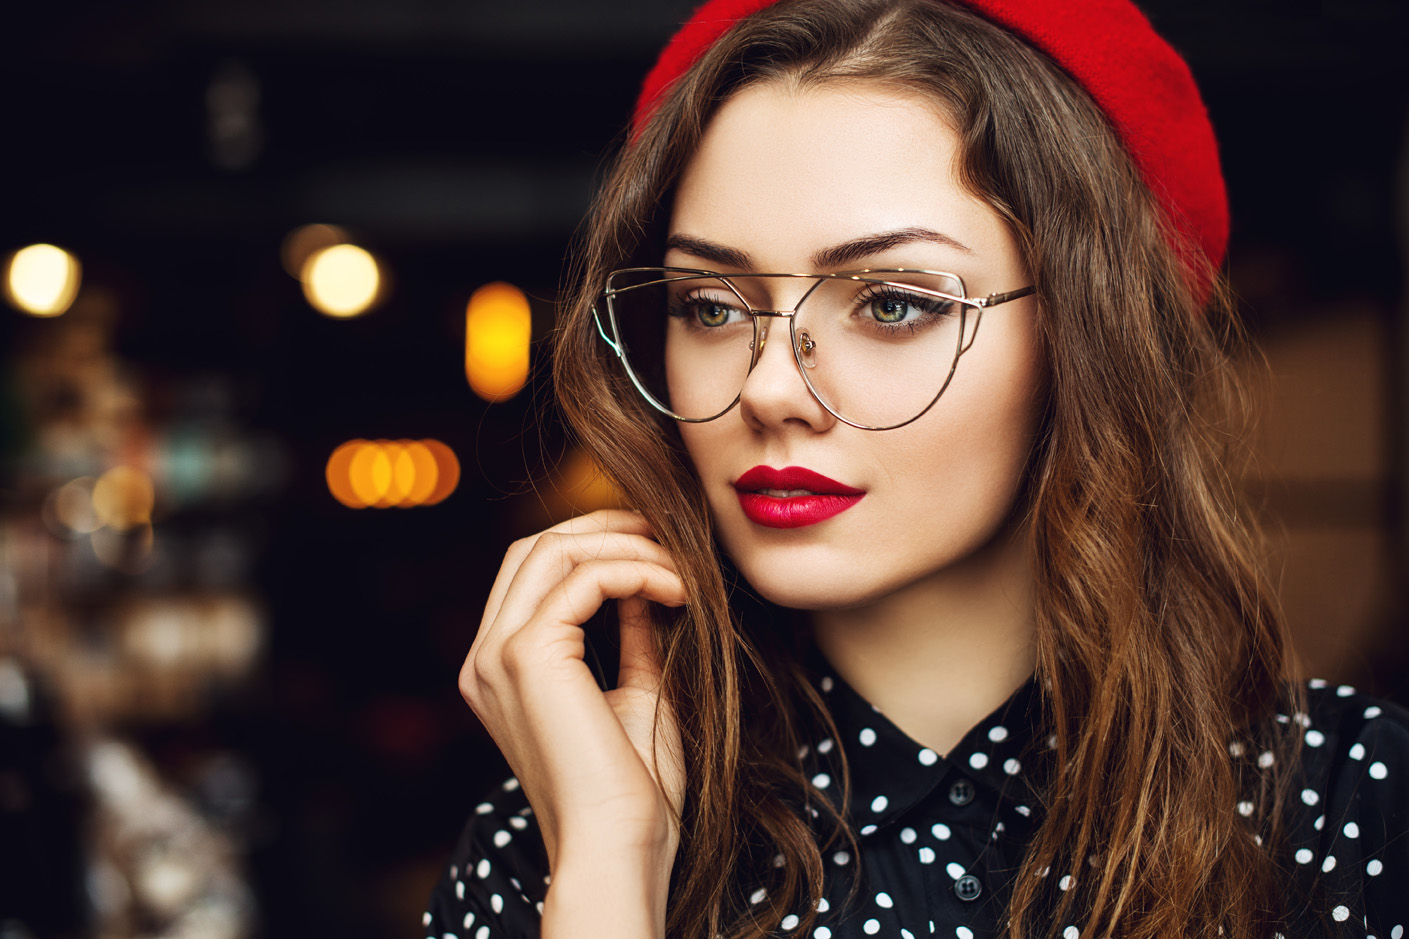 Close up portrait of young beautiful woman wearing stylish glasses, red beret, polka dot blouse. Model looking aside. Lights on background. Copy, empty space for text